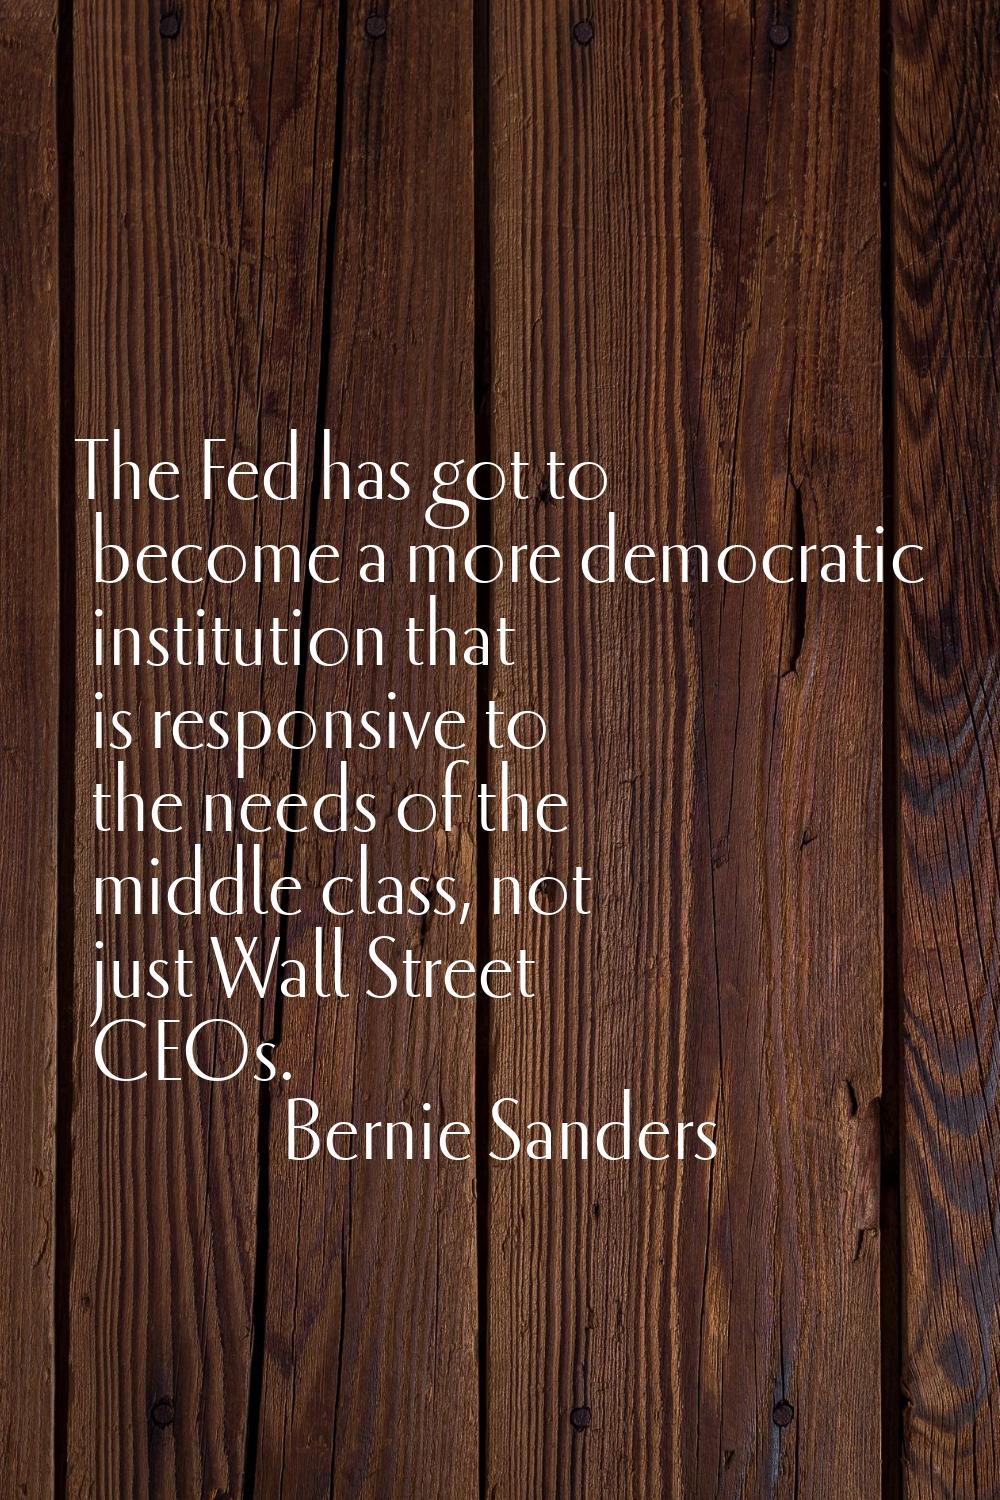 The Fed has got to become a more democratic institution that is responsive to the needs of the midd